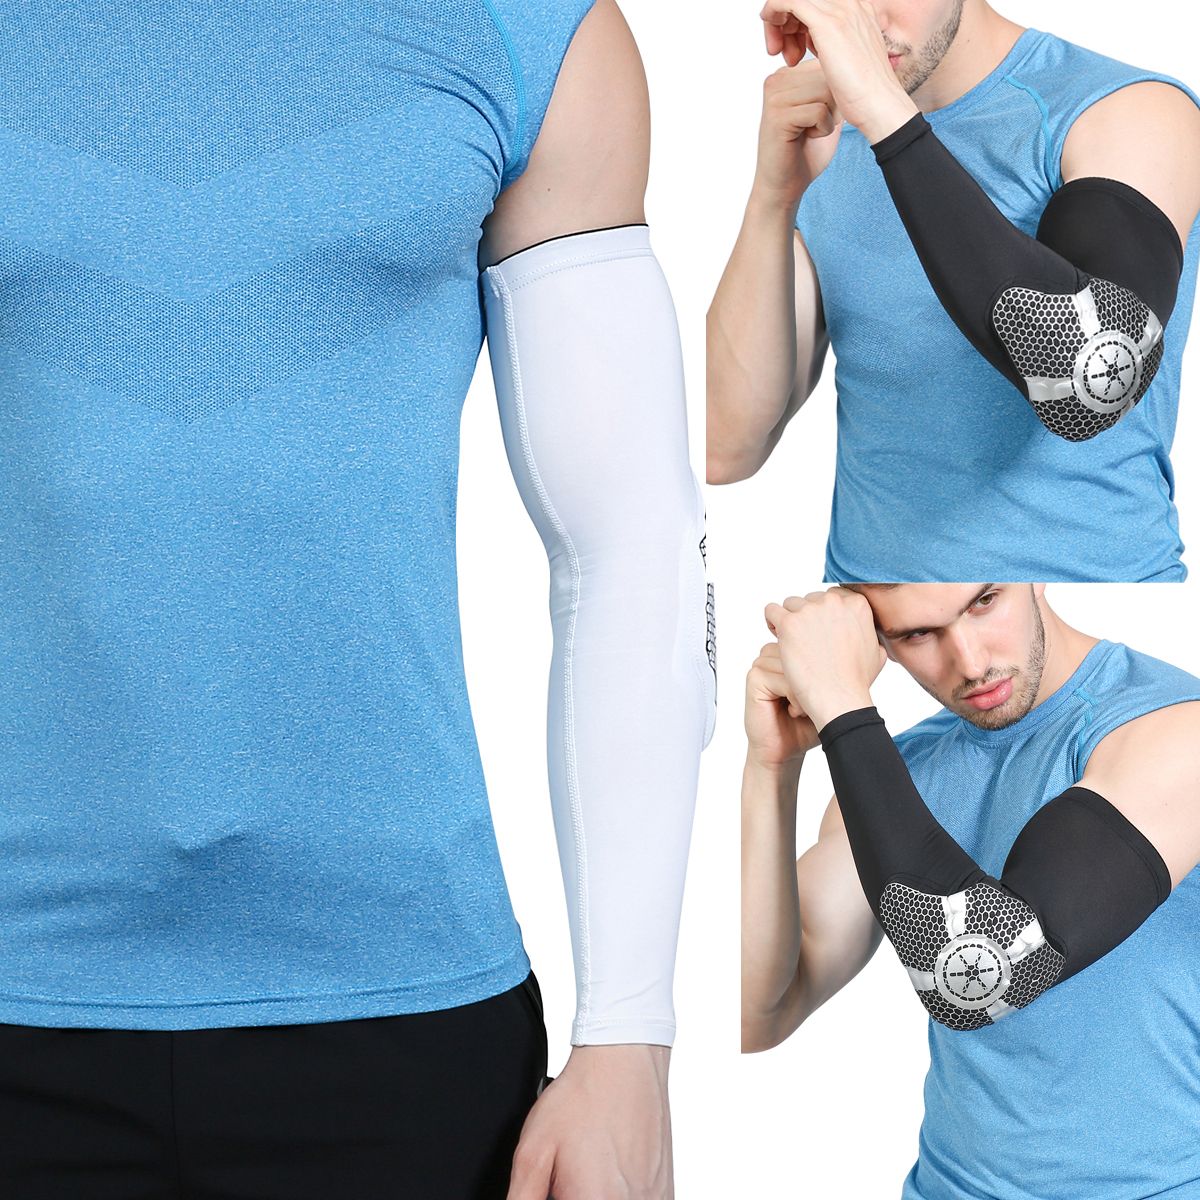 Elbow Guard Sleeve Compression Arm Sleeve Sport Elbow Support for Man and Women Blue M 